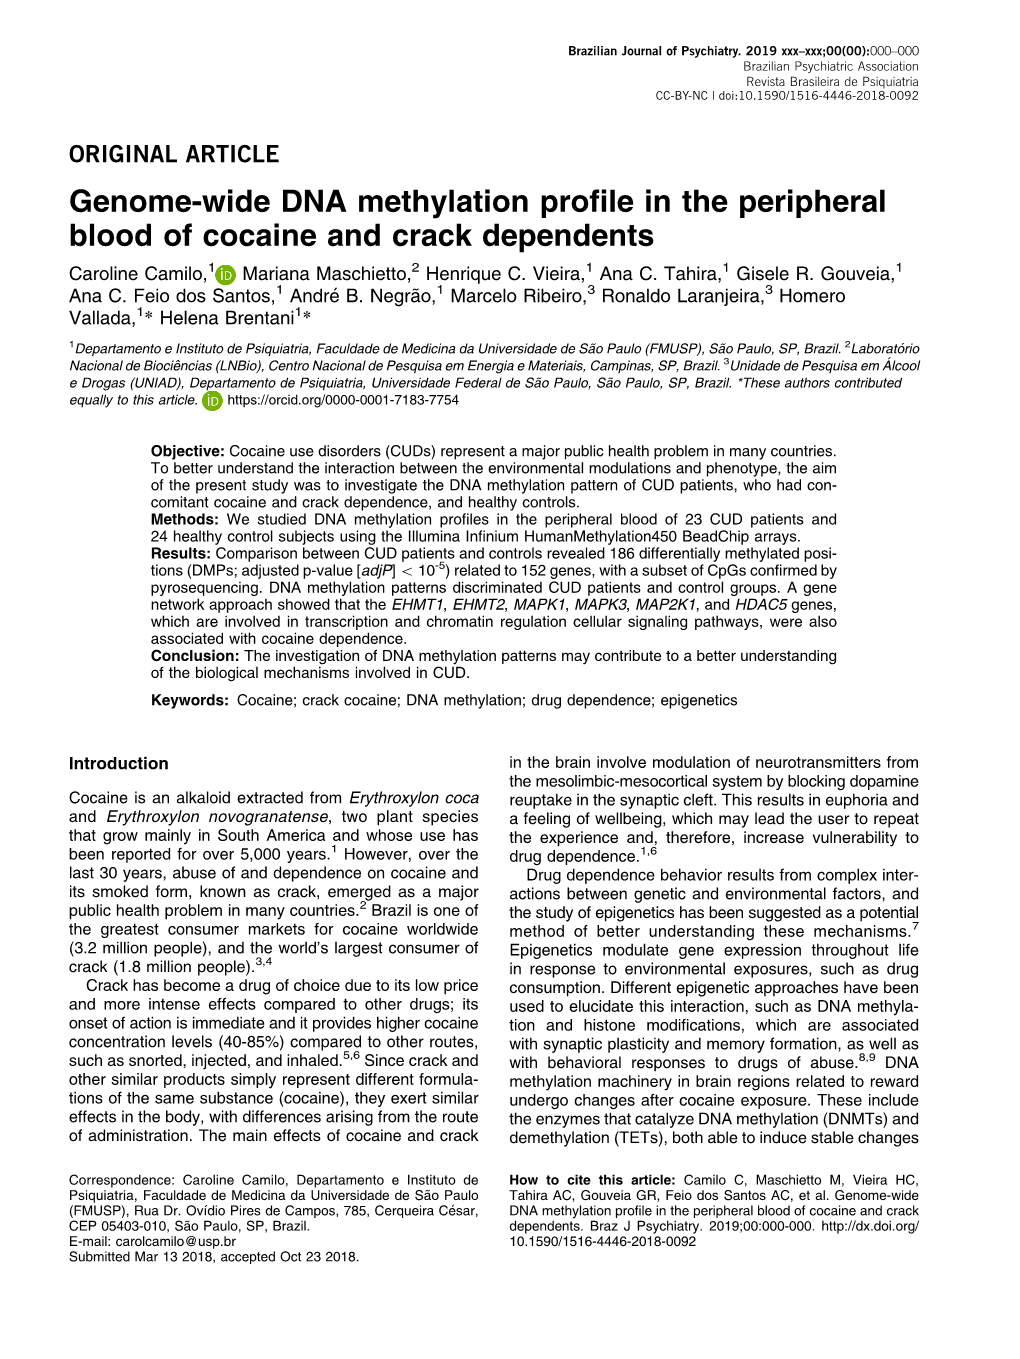 Genome-Wide DNA Methylation Profile in the Peripheral Blood of Cocaine